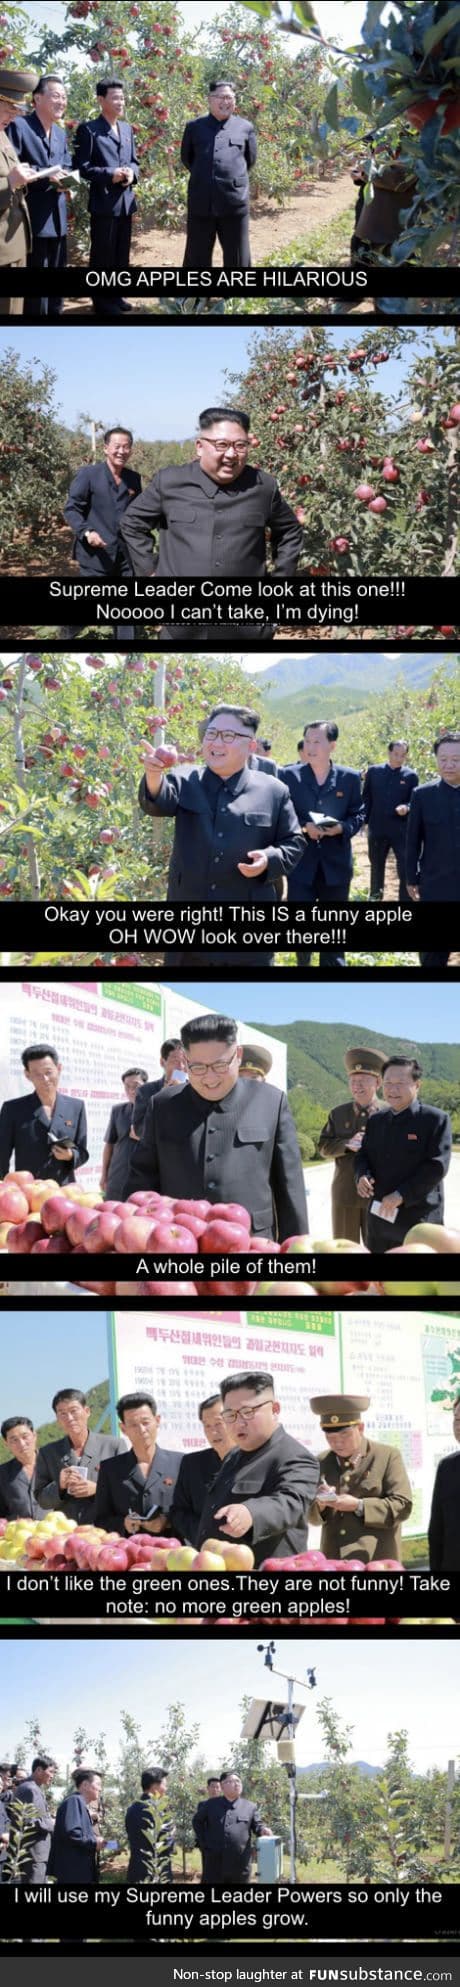 Red apples are hilarious